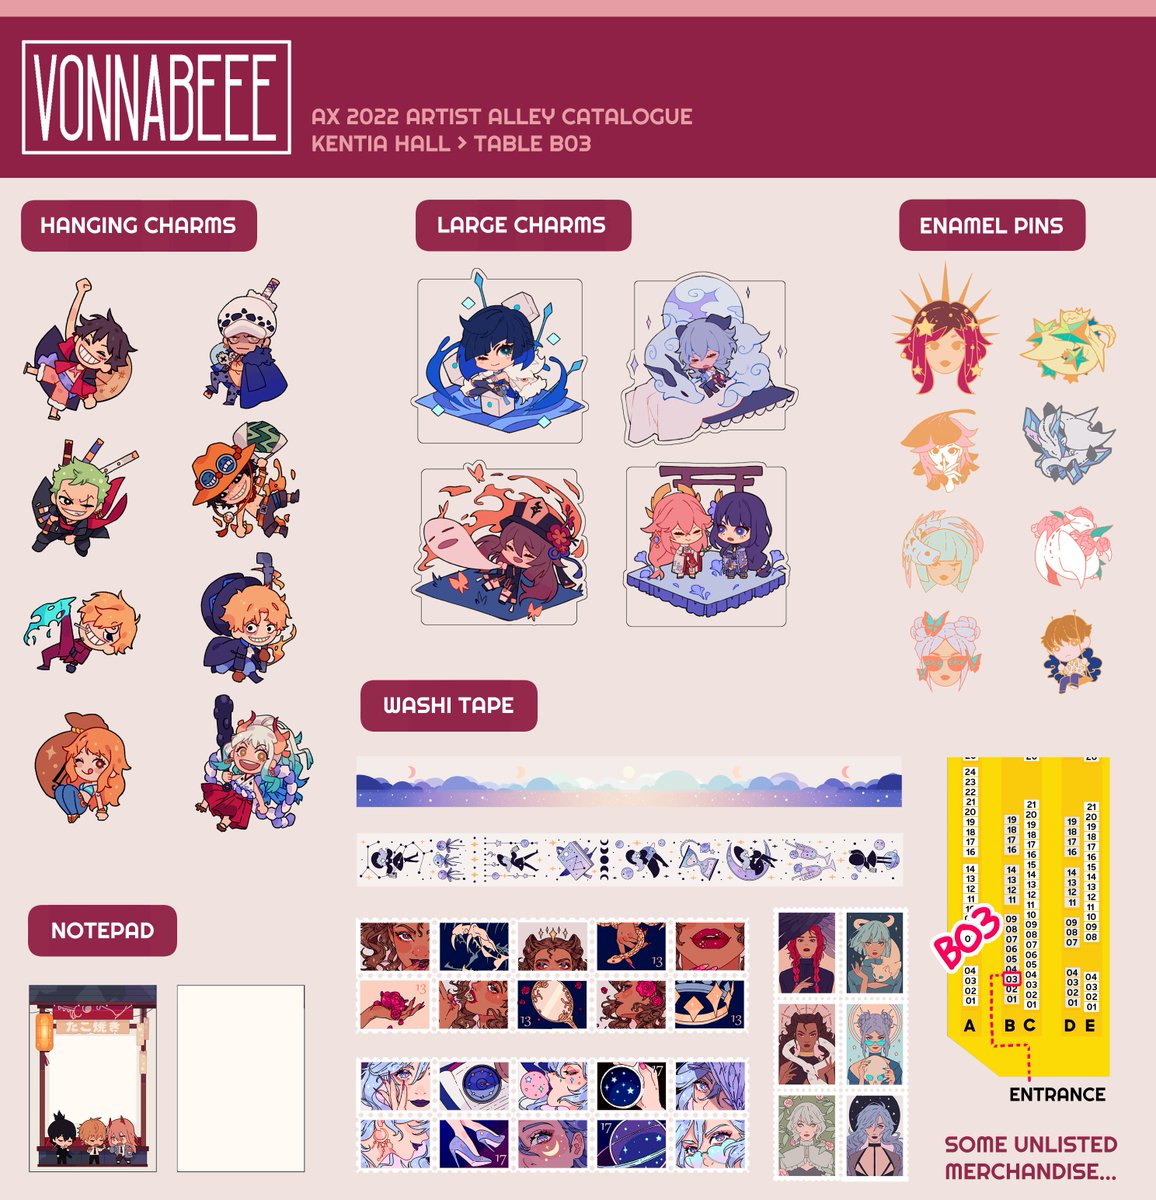 A quick catalog i tossed together for AX 2022 this year... Come by and visit at B03!! #AX2022ArtistAlley